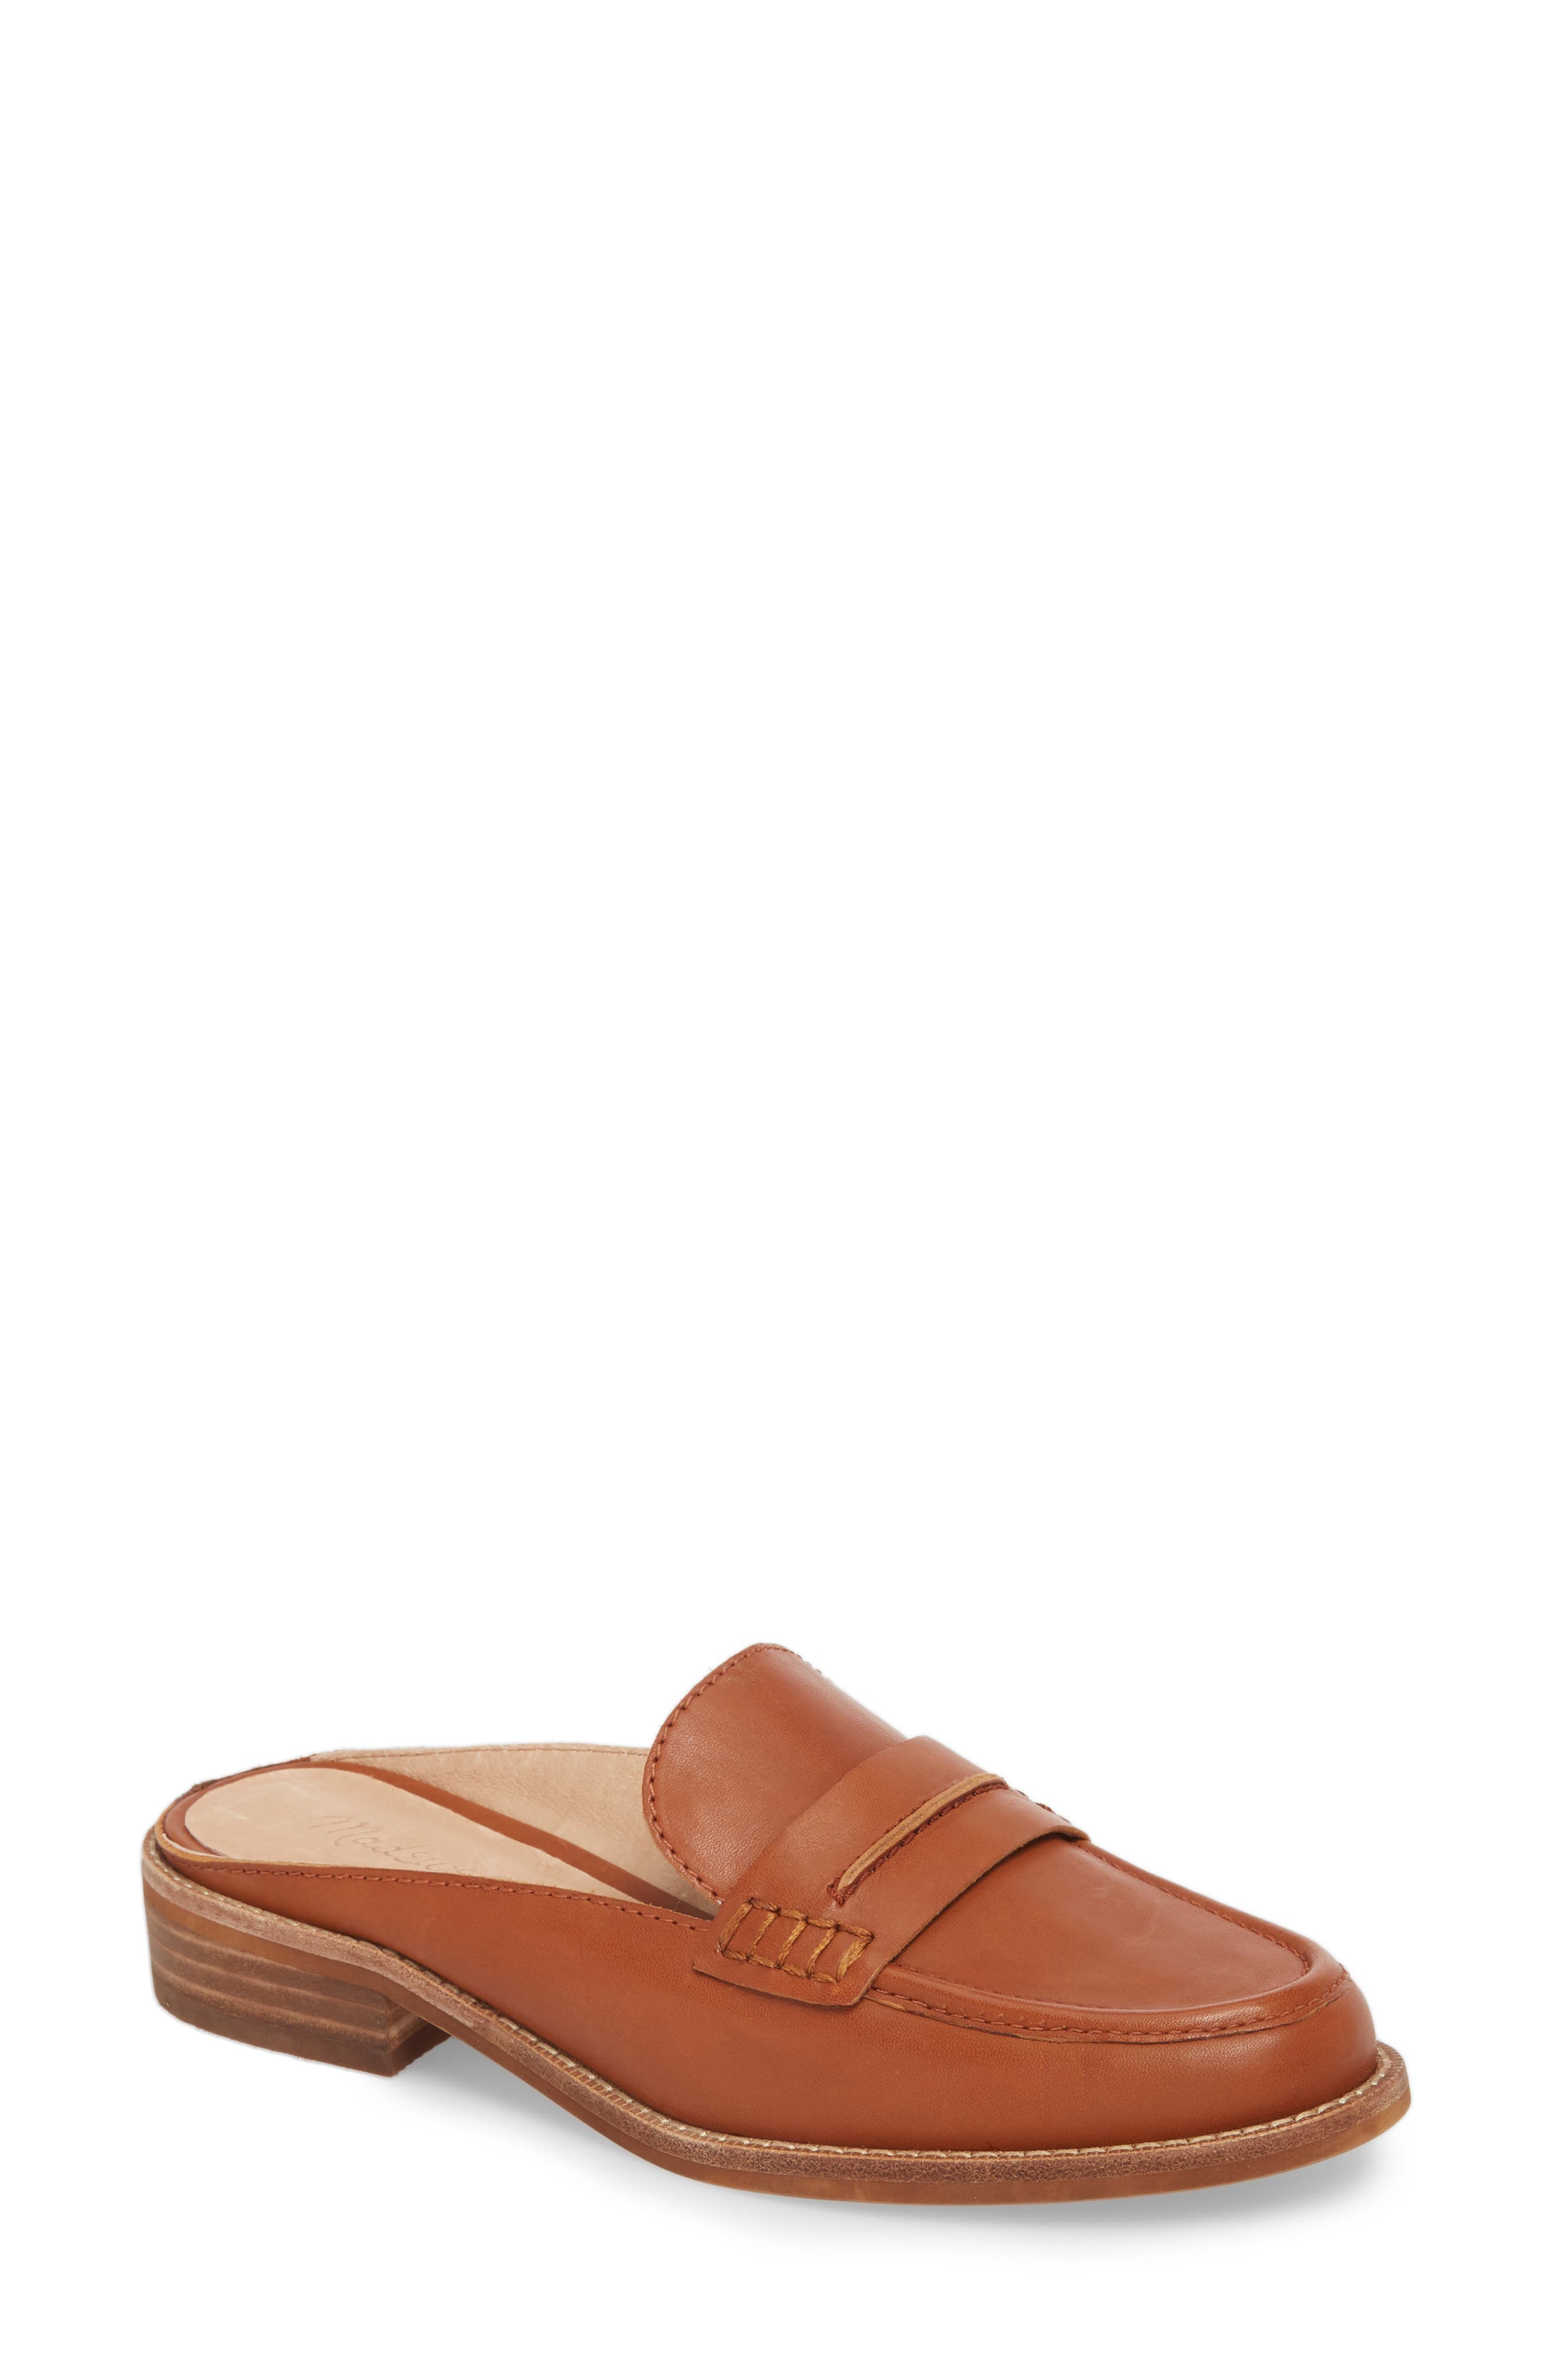 Madewell | The Elinor Loafer Mule 